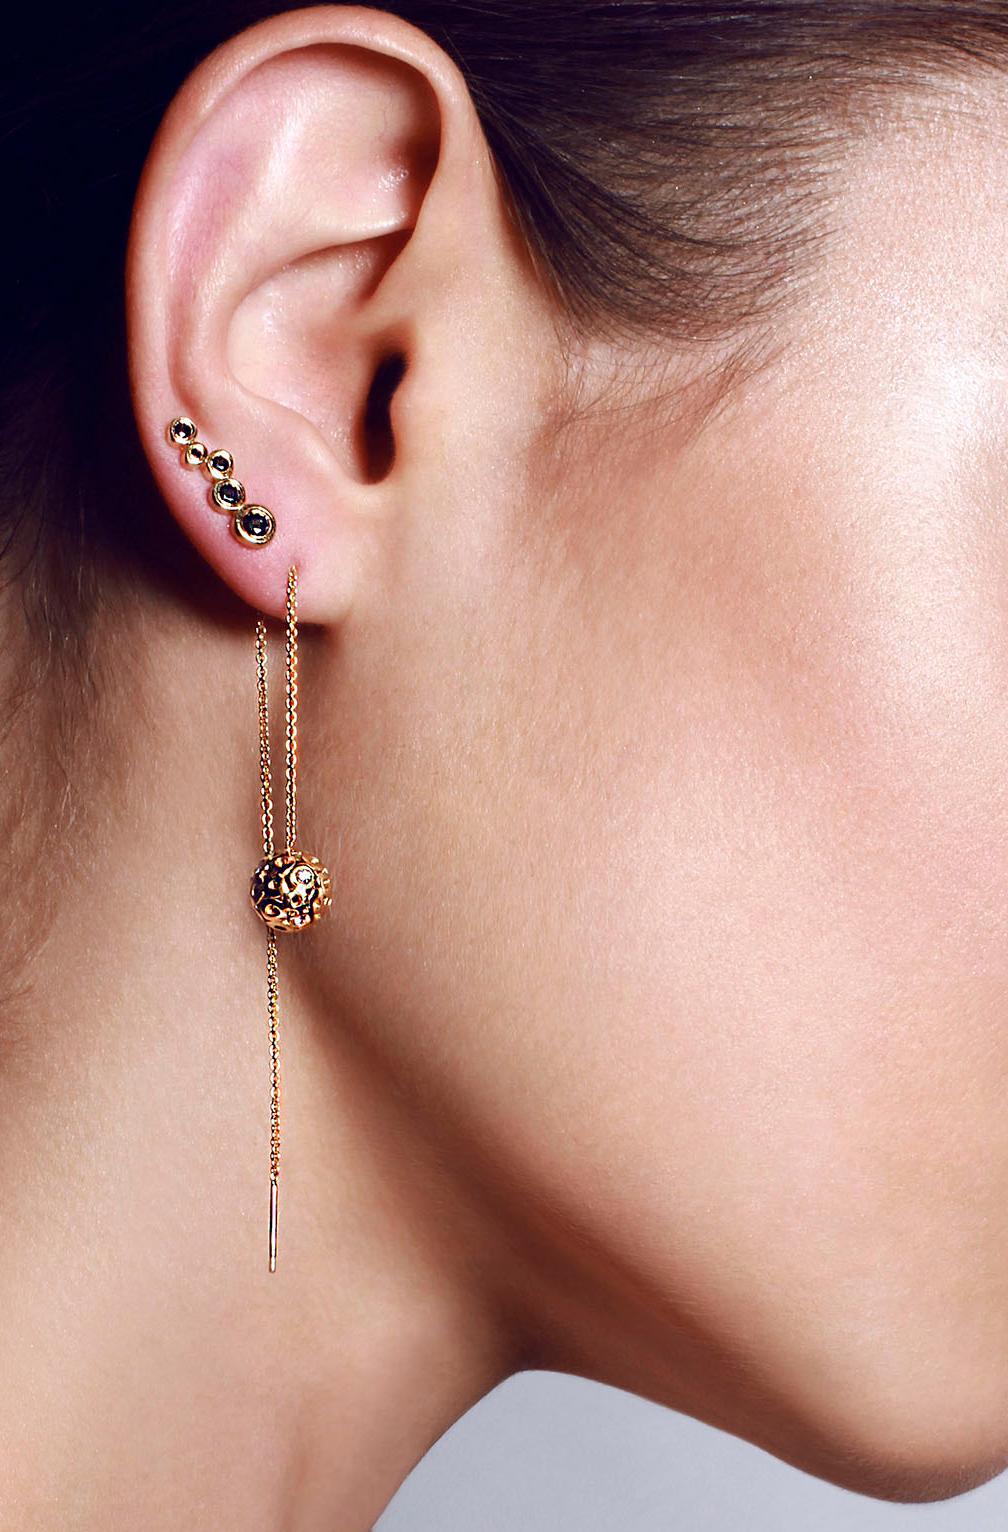 These pair of threader style post earrings with delicate chain are a versatile long earring style that looks great with your hair up or down. The gold balls are composed of two half-spheres consisting of Hi June Parker's signature organic